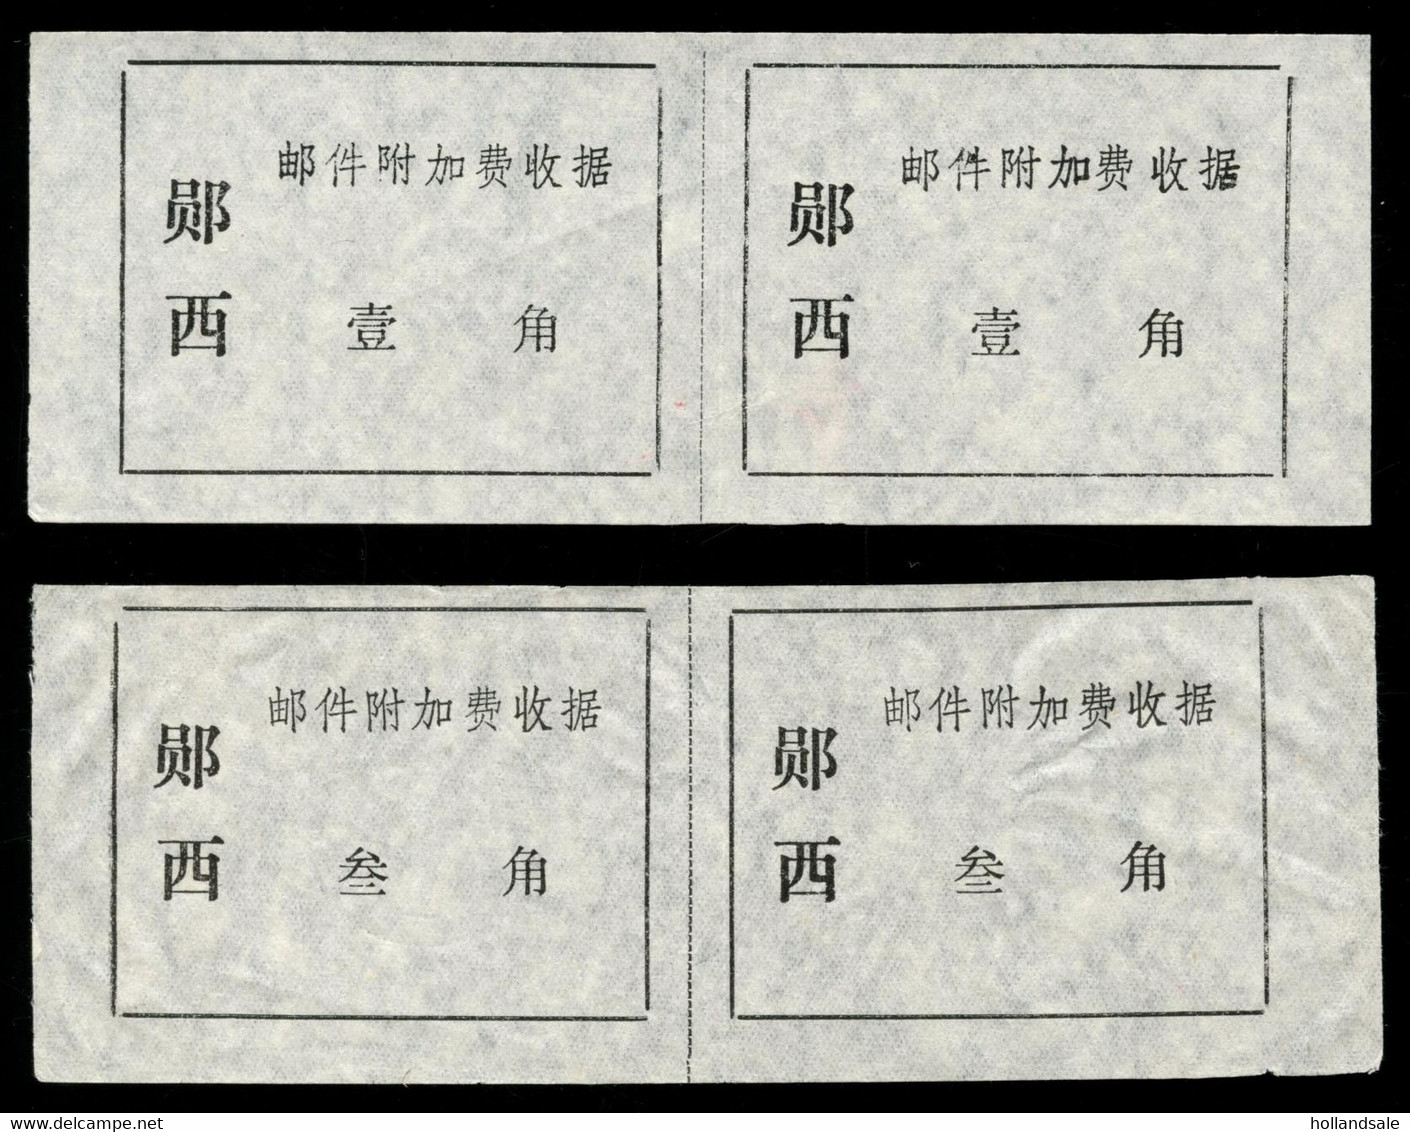 CHINA PRC - ADDED CHARGE LABELS -  10f, 30f  Labels Of Yunxi, Hubei Prov. D&O # 12-0210/12-0211 - Impuestos